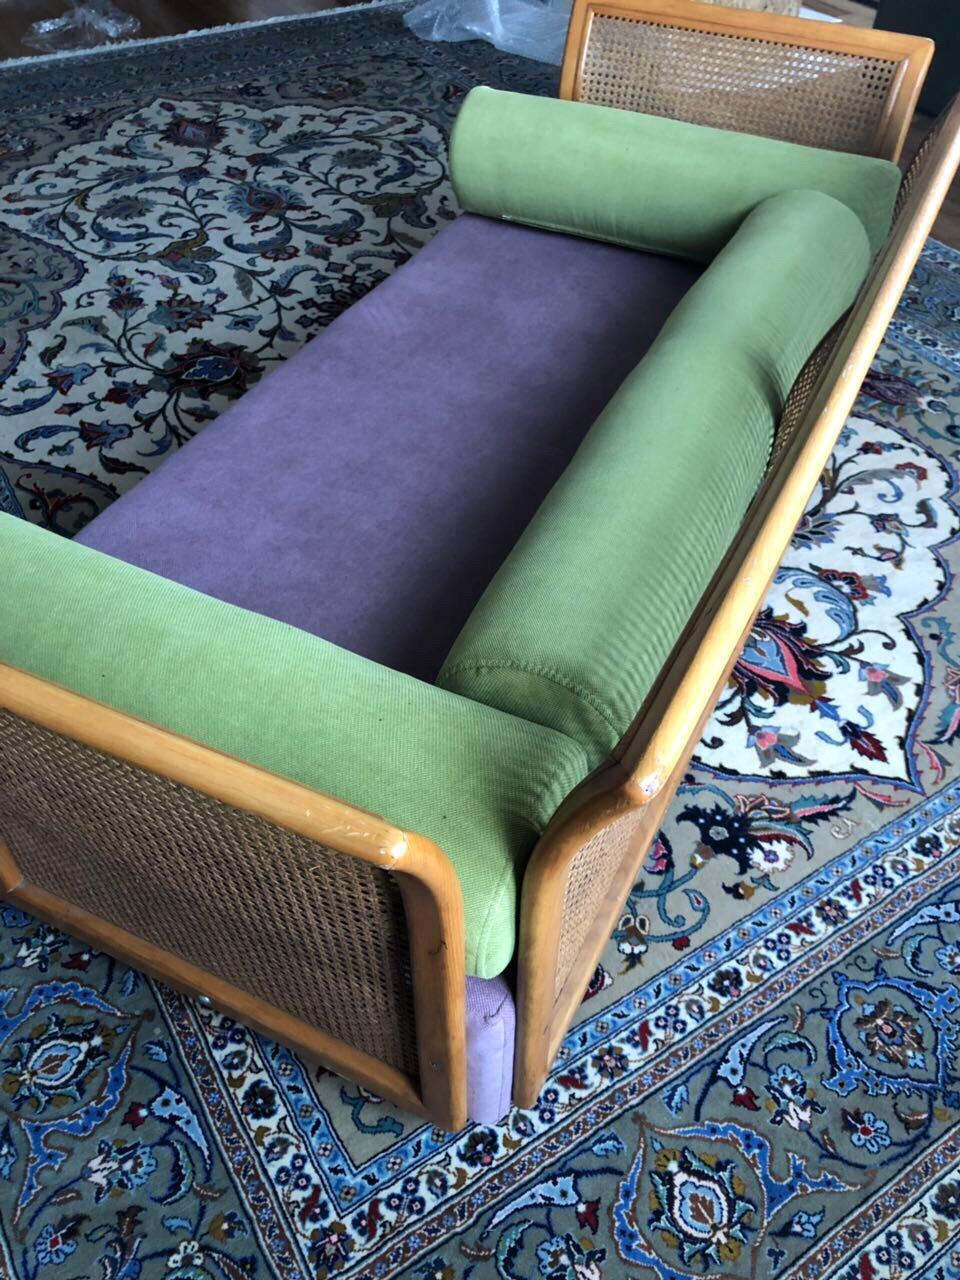 Cane Settee purple green new upholstery, Mid-Century Modern, Italy.